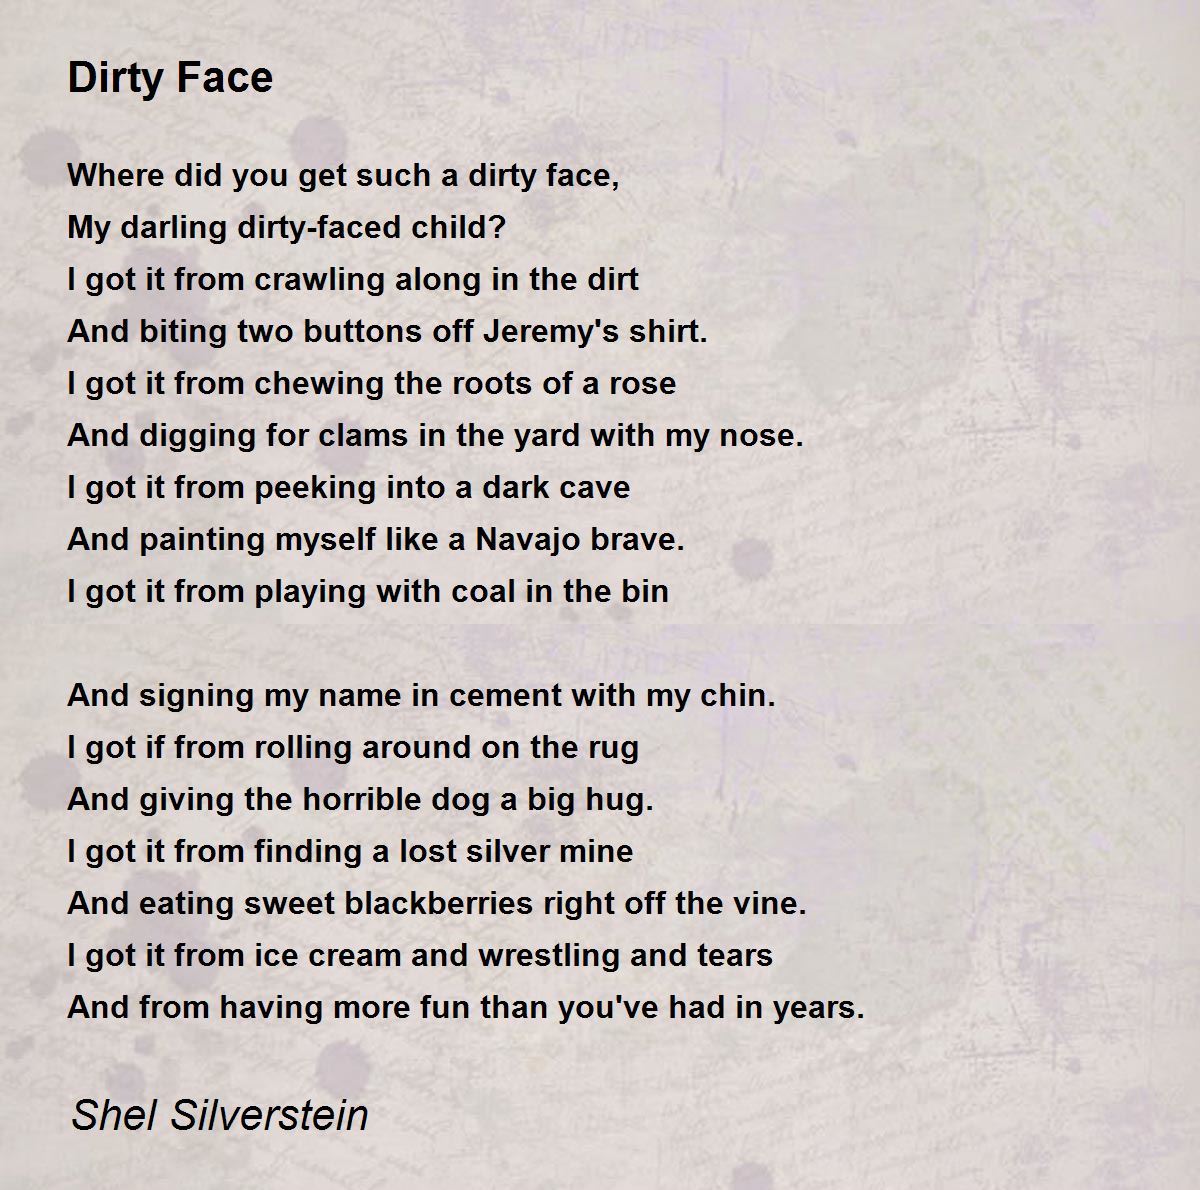 Dirty Face - Dirty Face Poem by Shel Silverstein